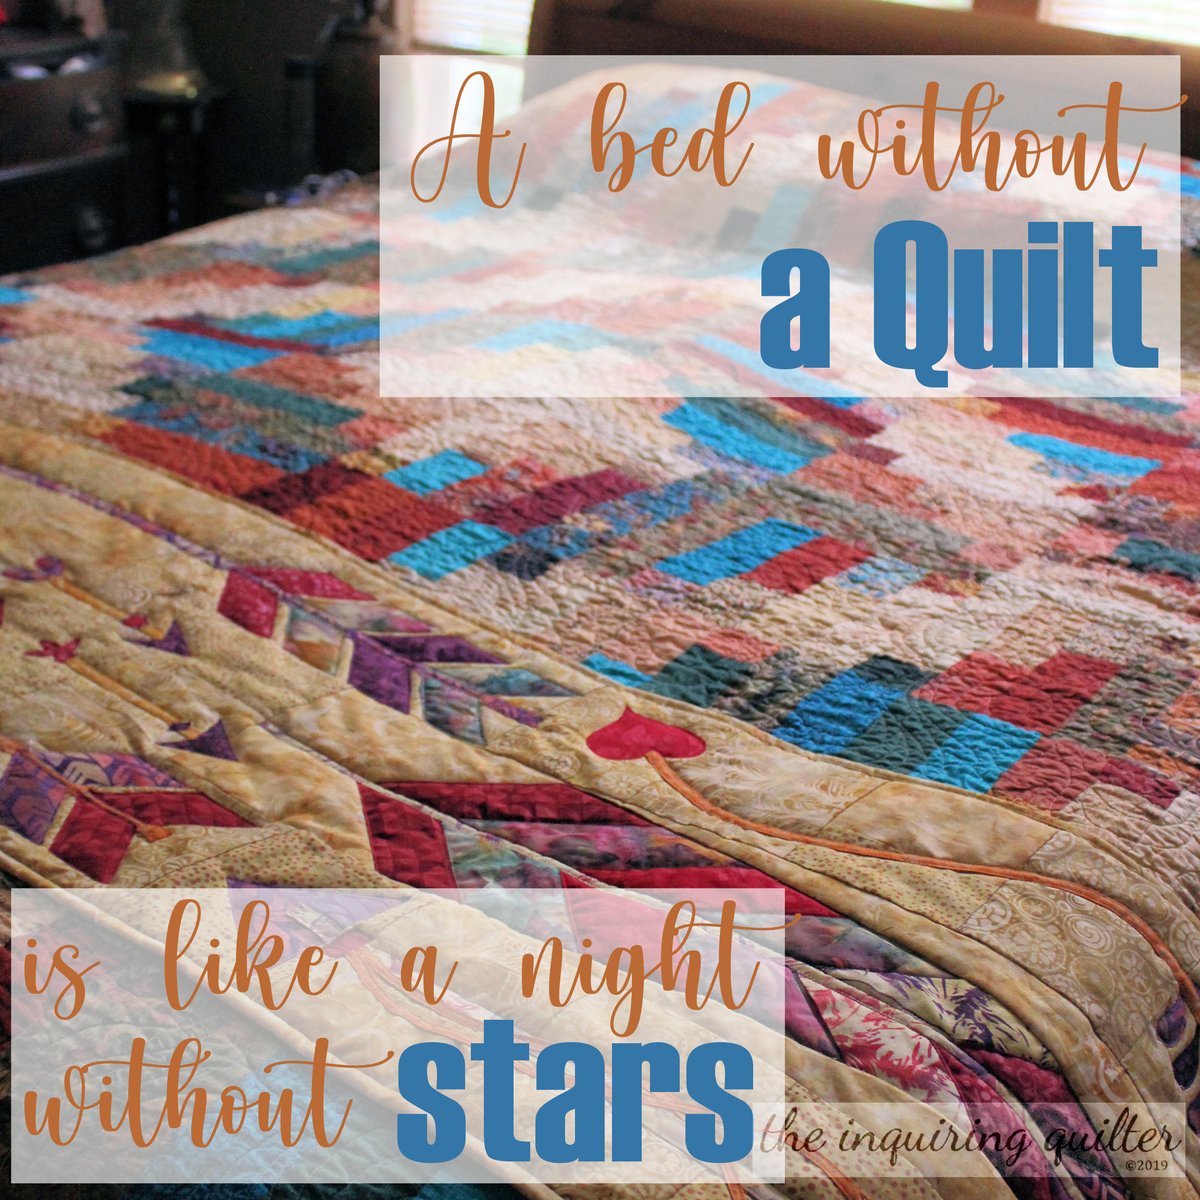 No more naked beds! 😜

#inquiringquilter #quiltingismytherapy #quiltingismybliss #quotestoliveby #quoteoftheday #quotes #quotesaboutlife #behappyandsmile #findyourjoy #quiltquotes